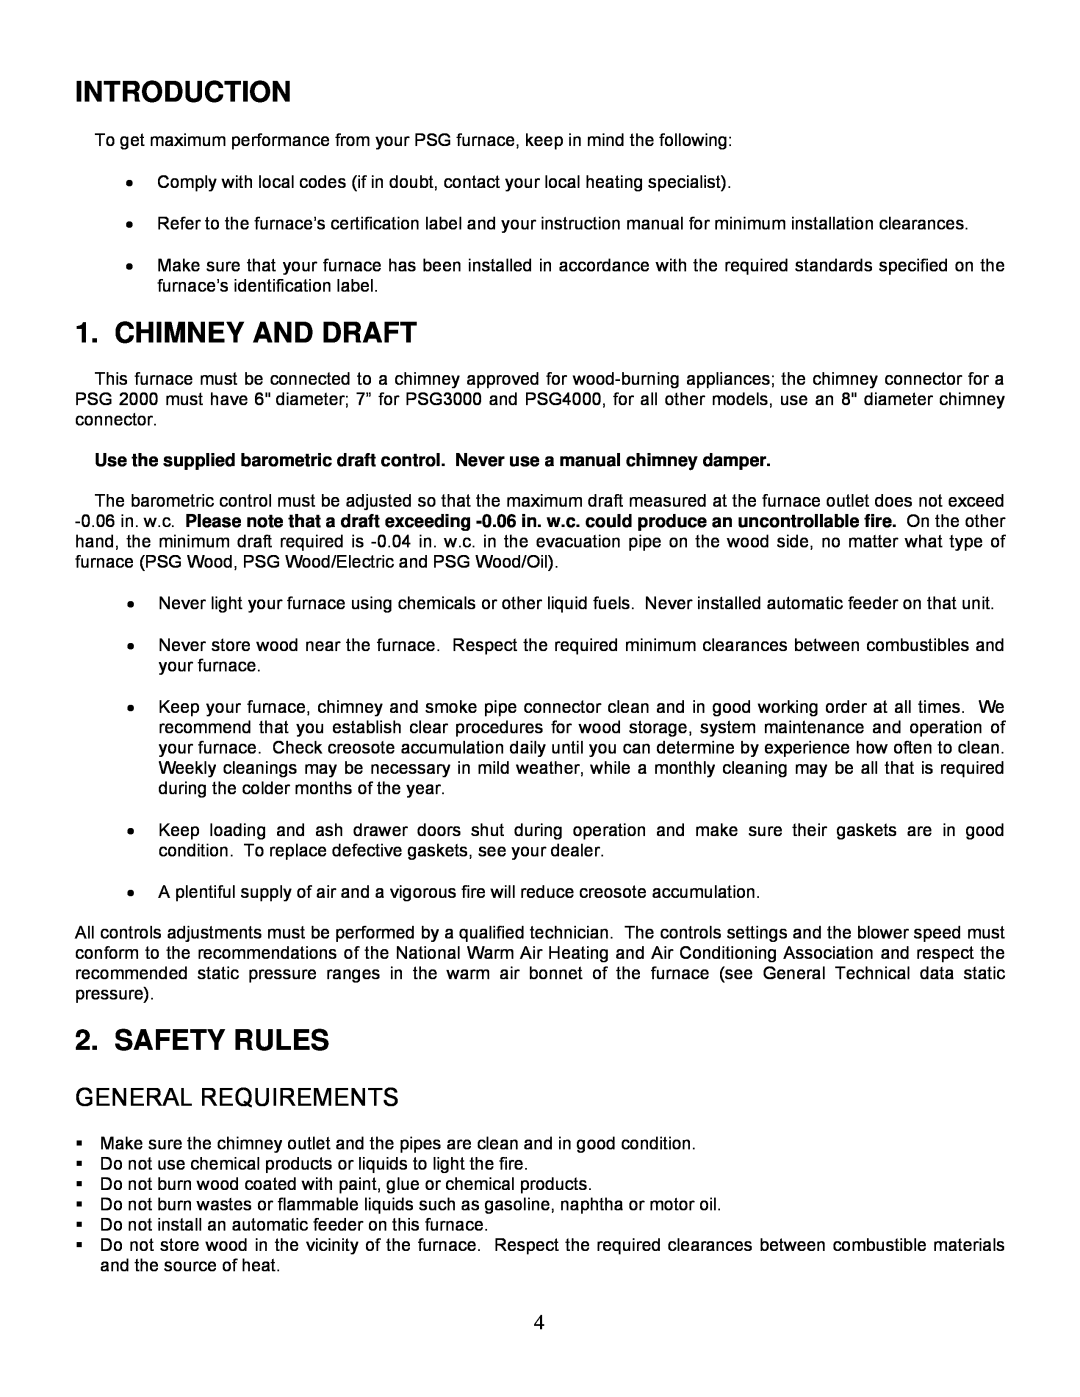 White Rodgers G1N 4R9 manual Introduction, Chimney And Draft, Safety Rules, General Requirements 